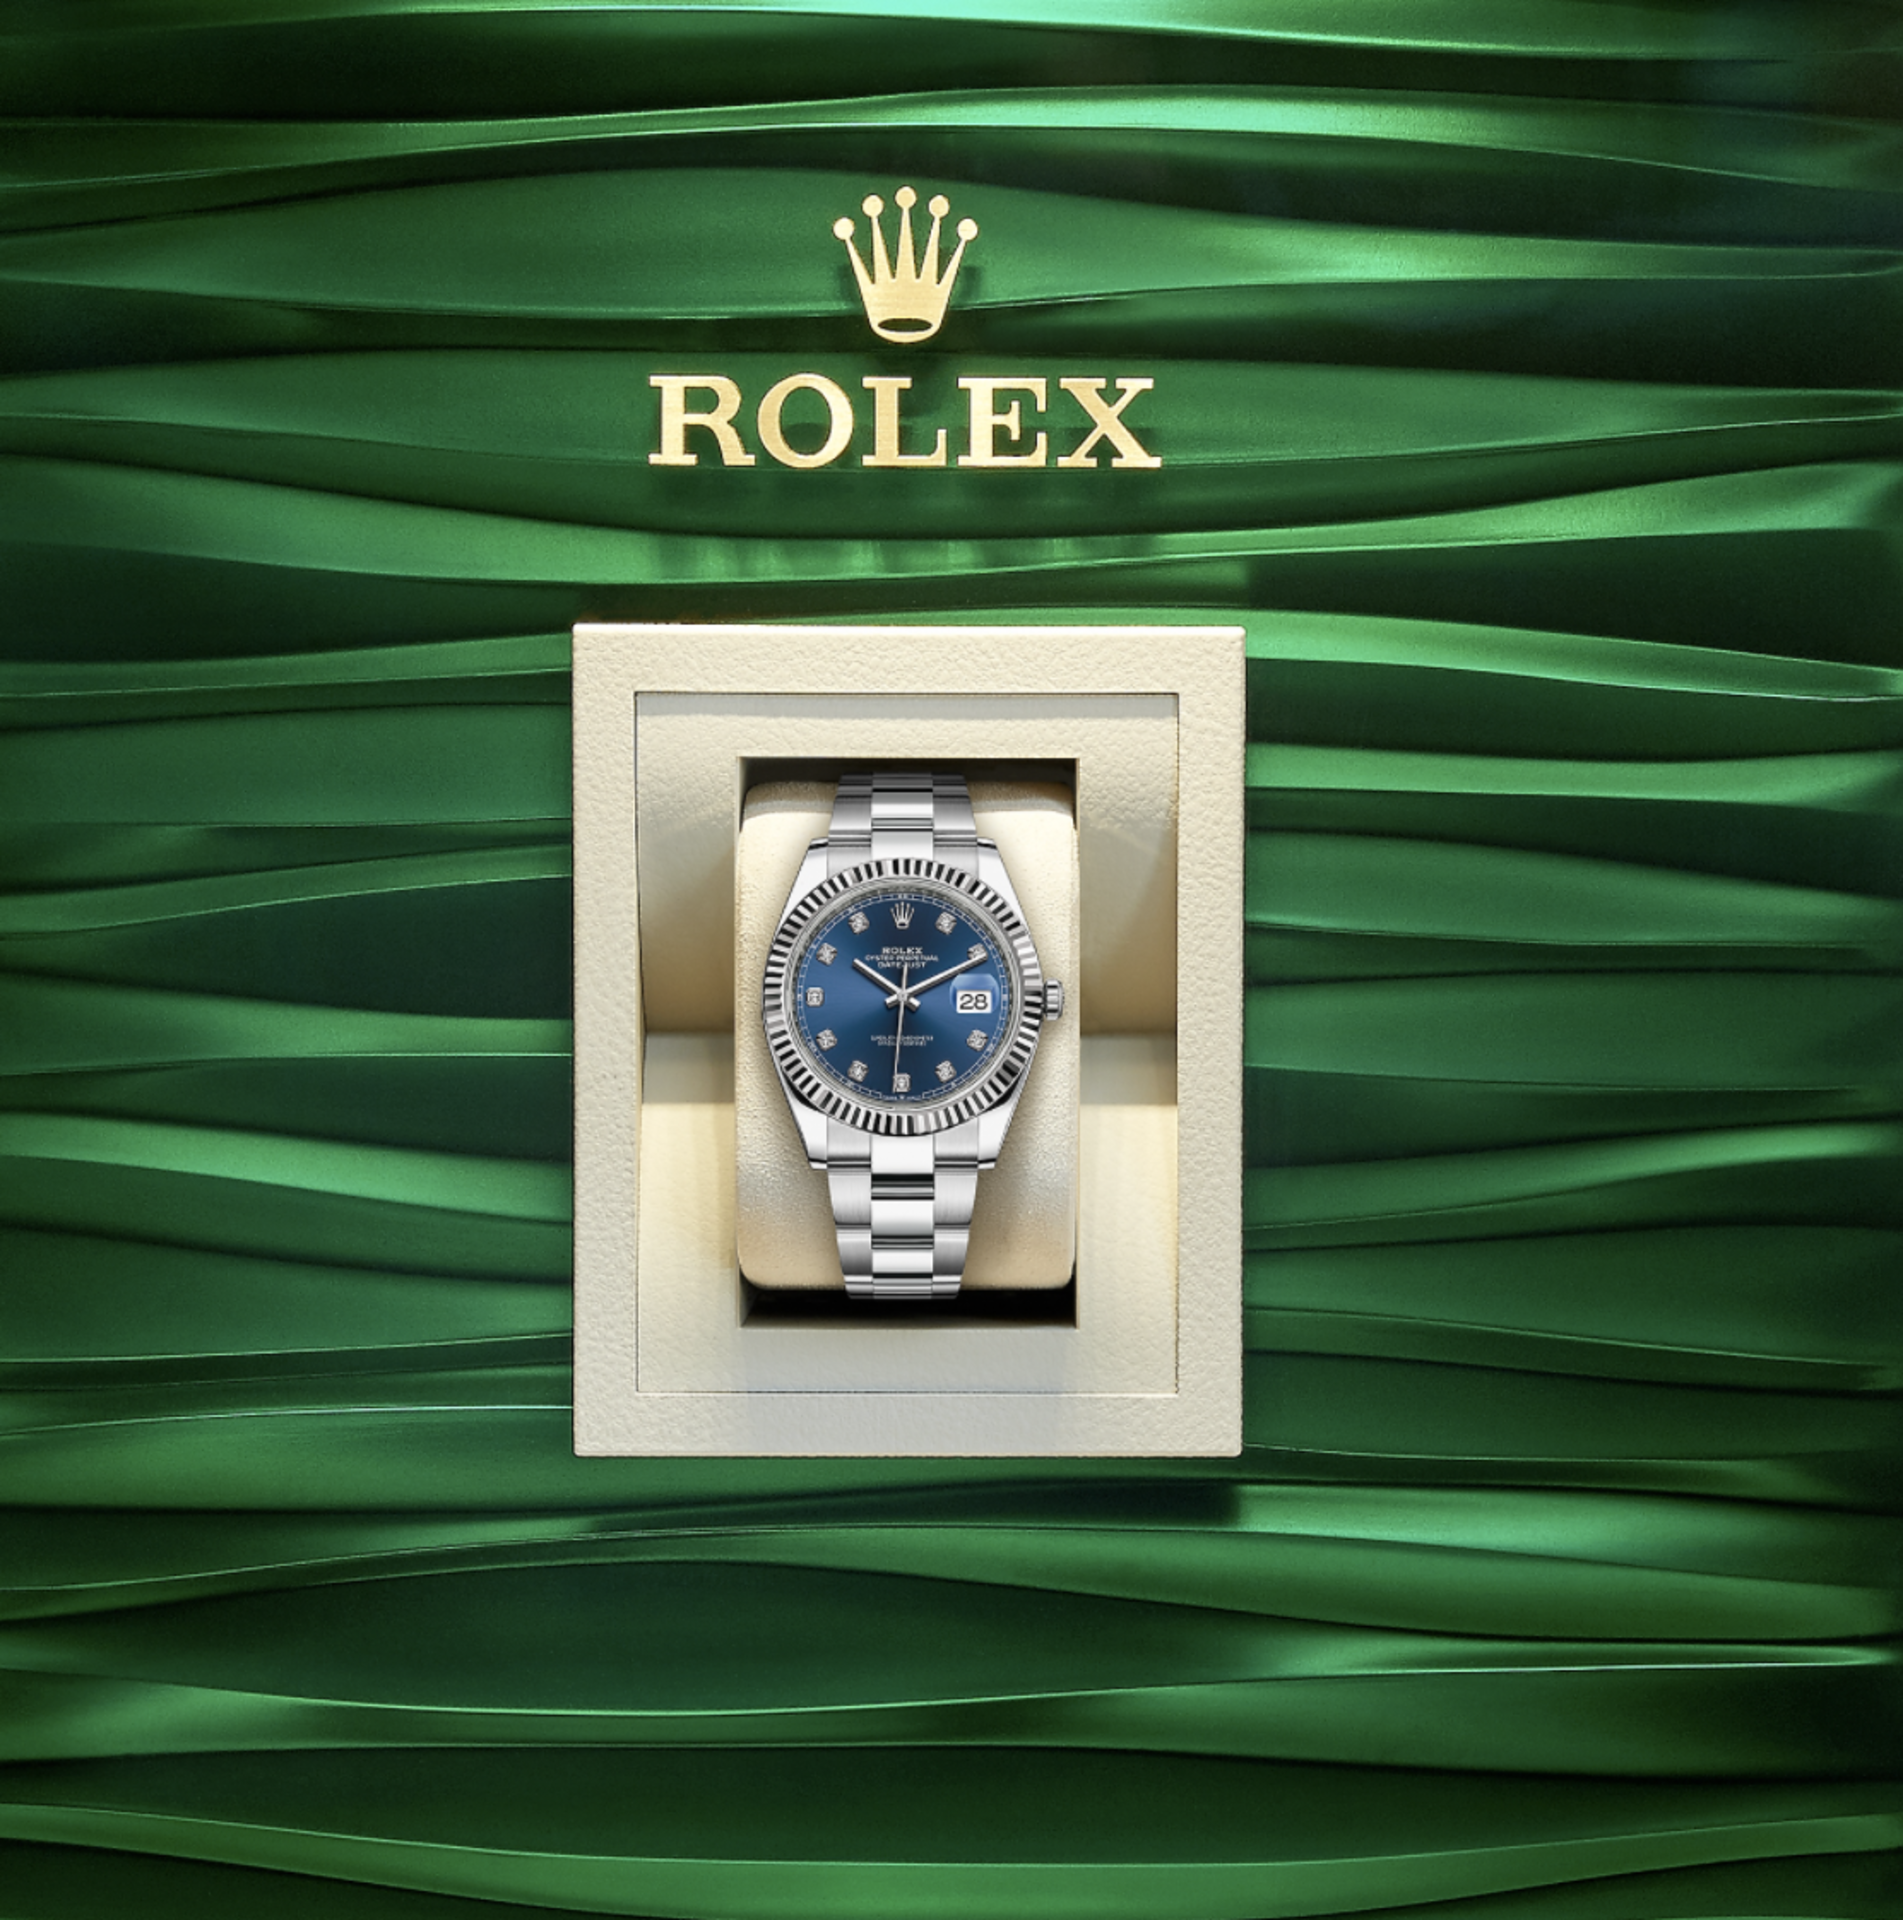 ** ON SALE ** Rolex Date-Just 41mm White Gold OysterSteel 2021 Blue Diamond Dial ** Brand New ** - Image 3 of 3